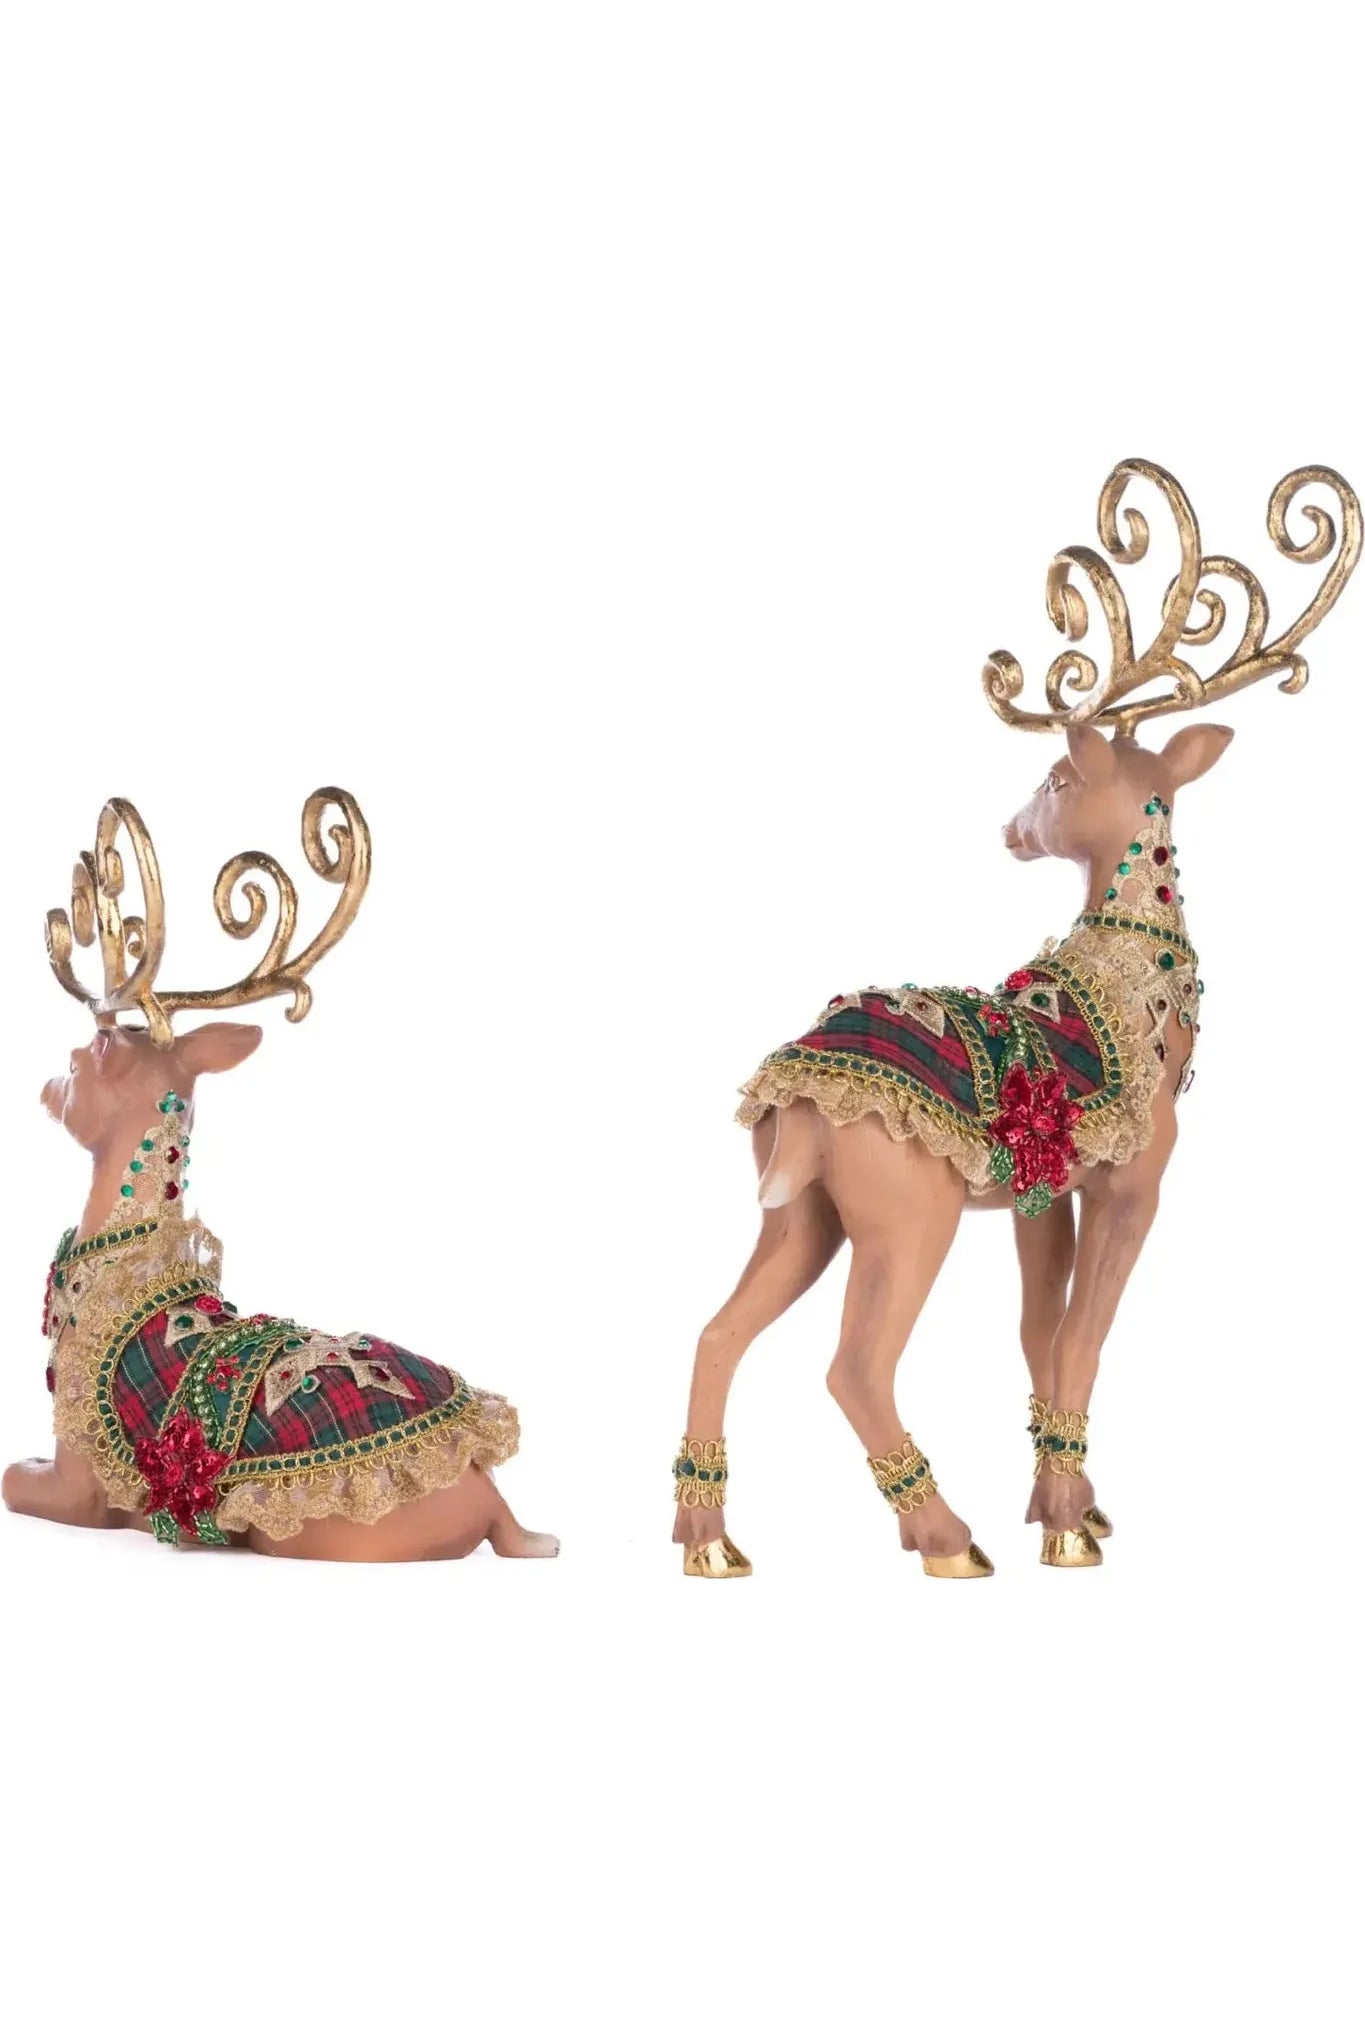 Shop For Holiday Magic Deer Assortment of 2 28-428523